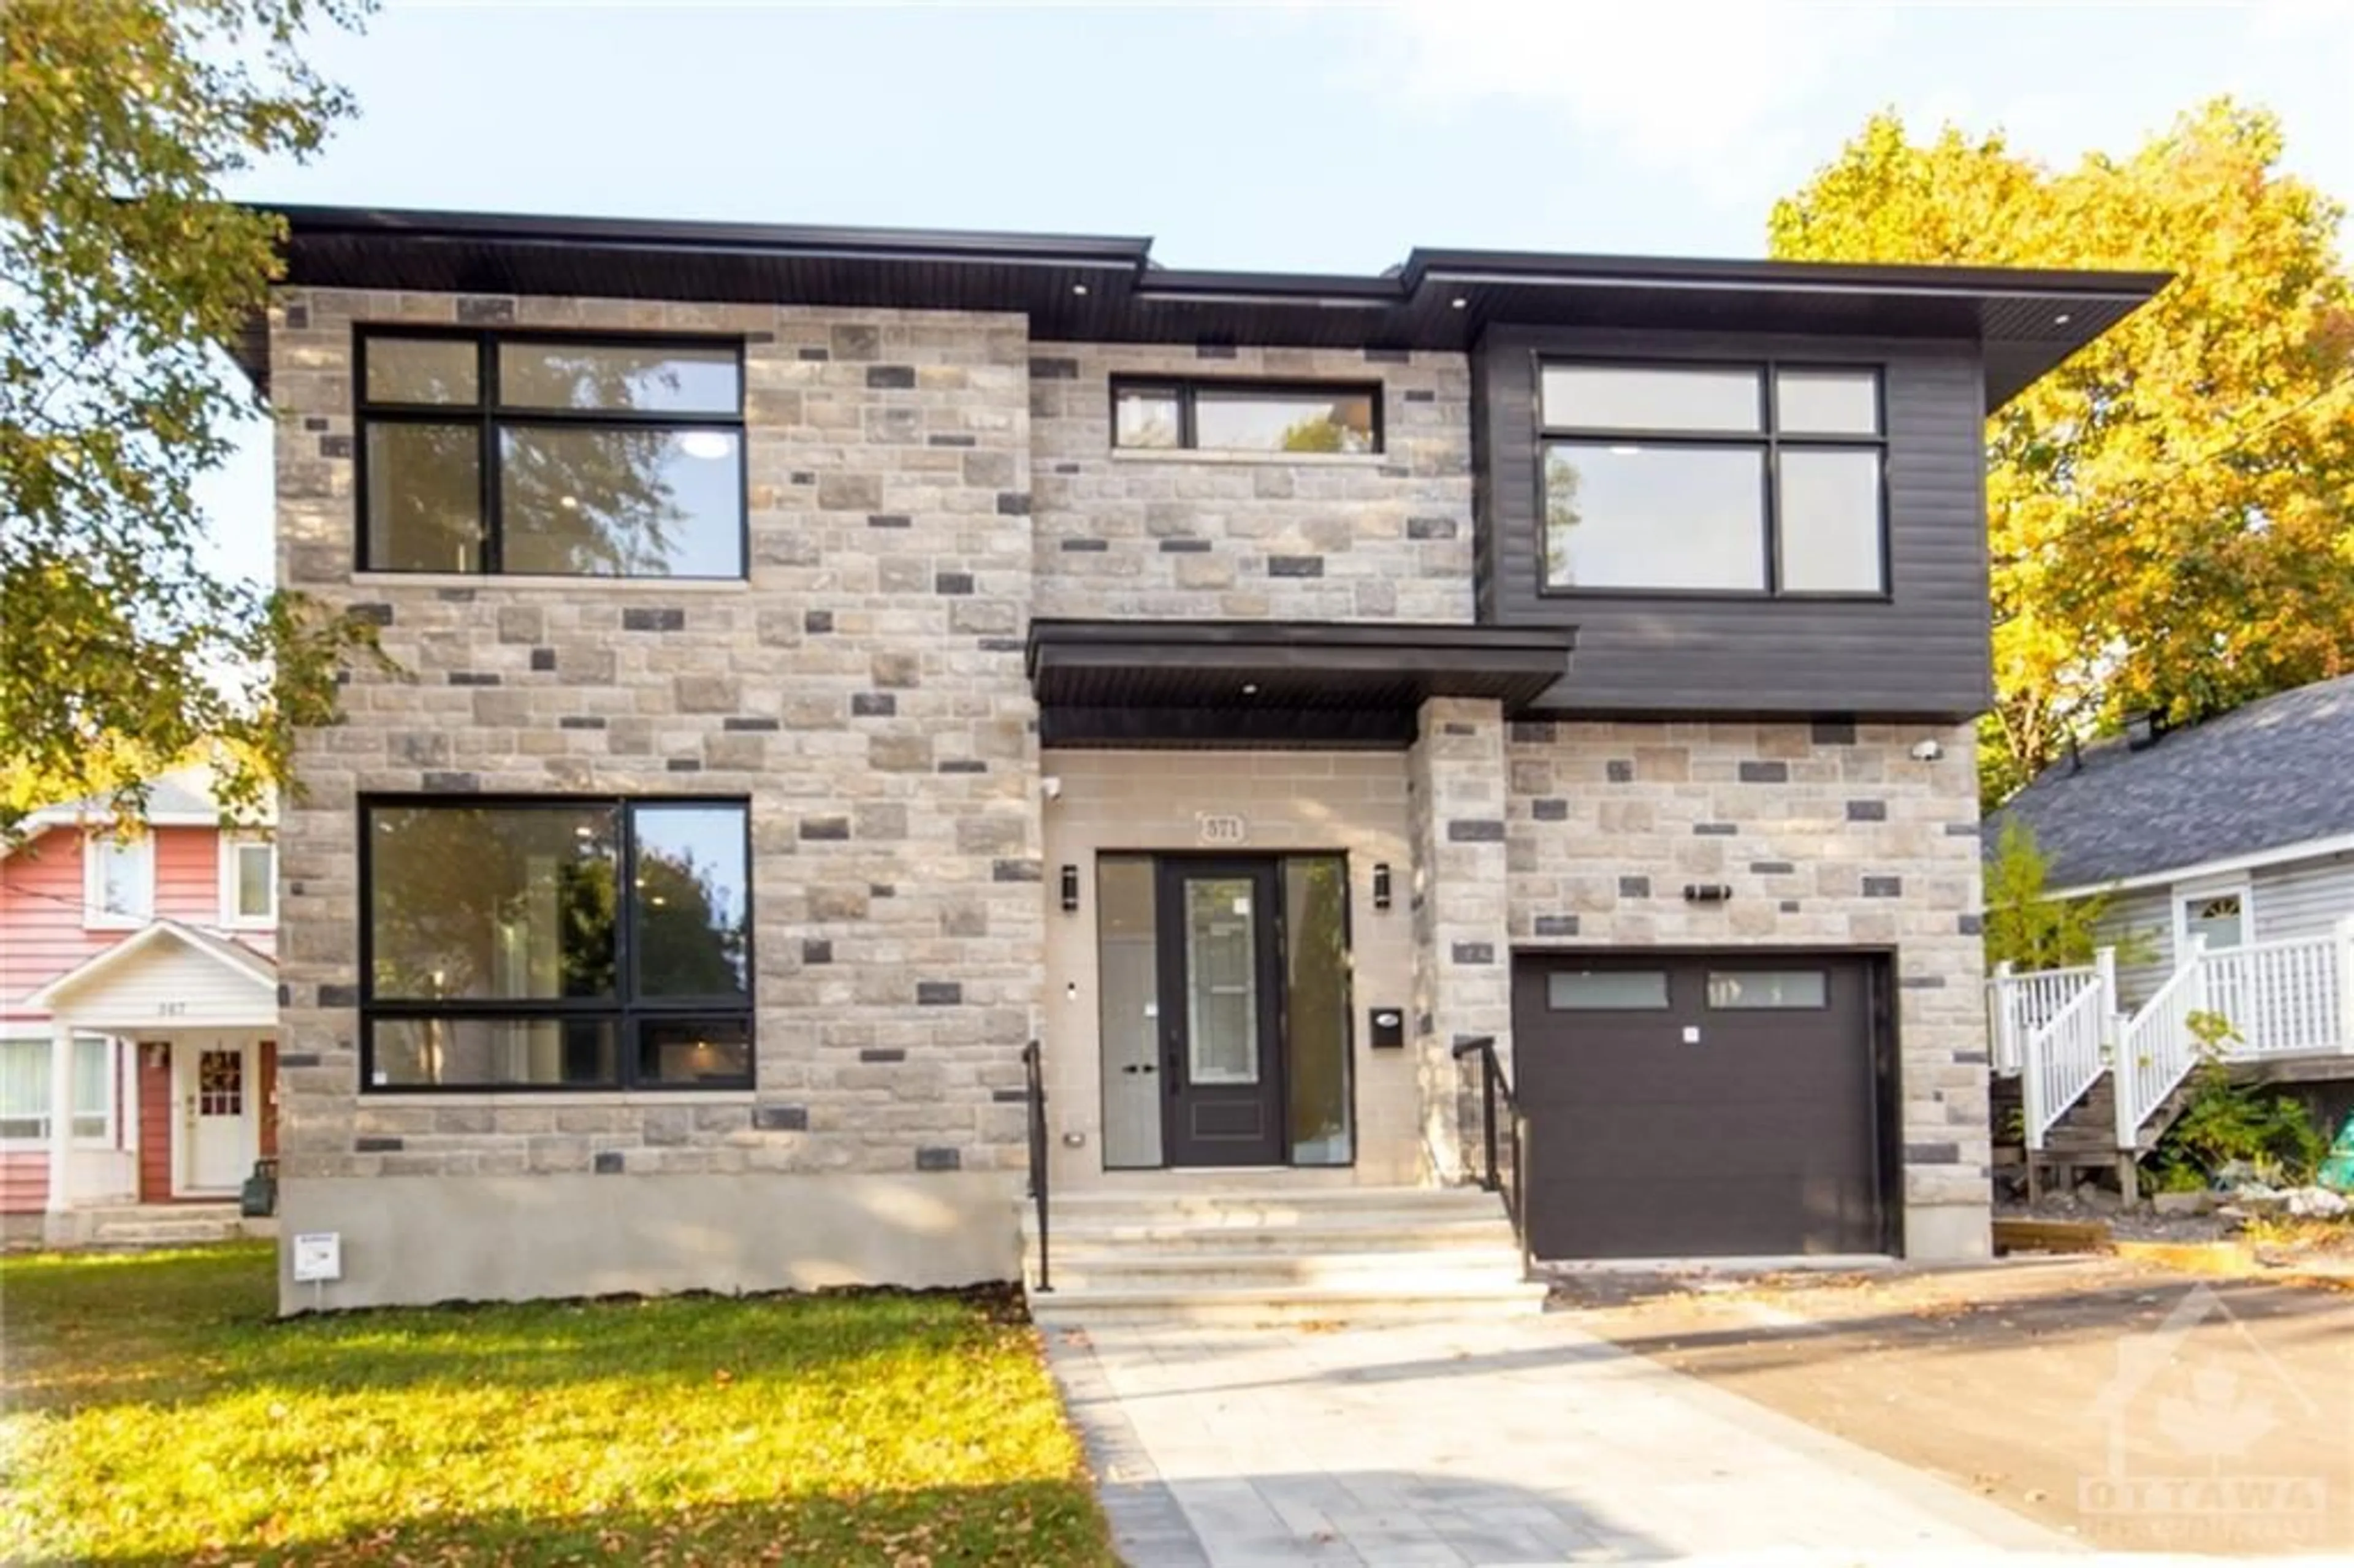 Home with brick exterior material for 571 MUTUAL St, Ottawa Ontario K1K 1C5